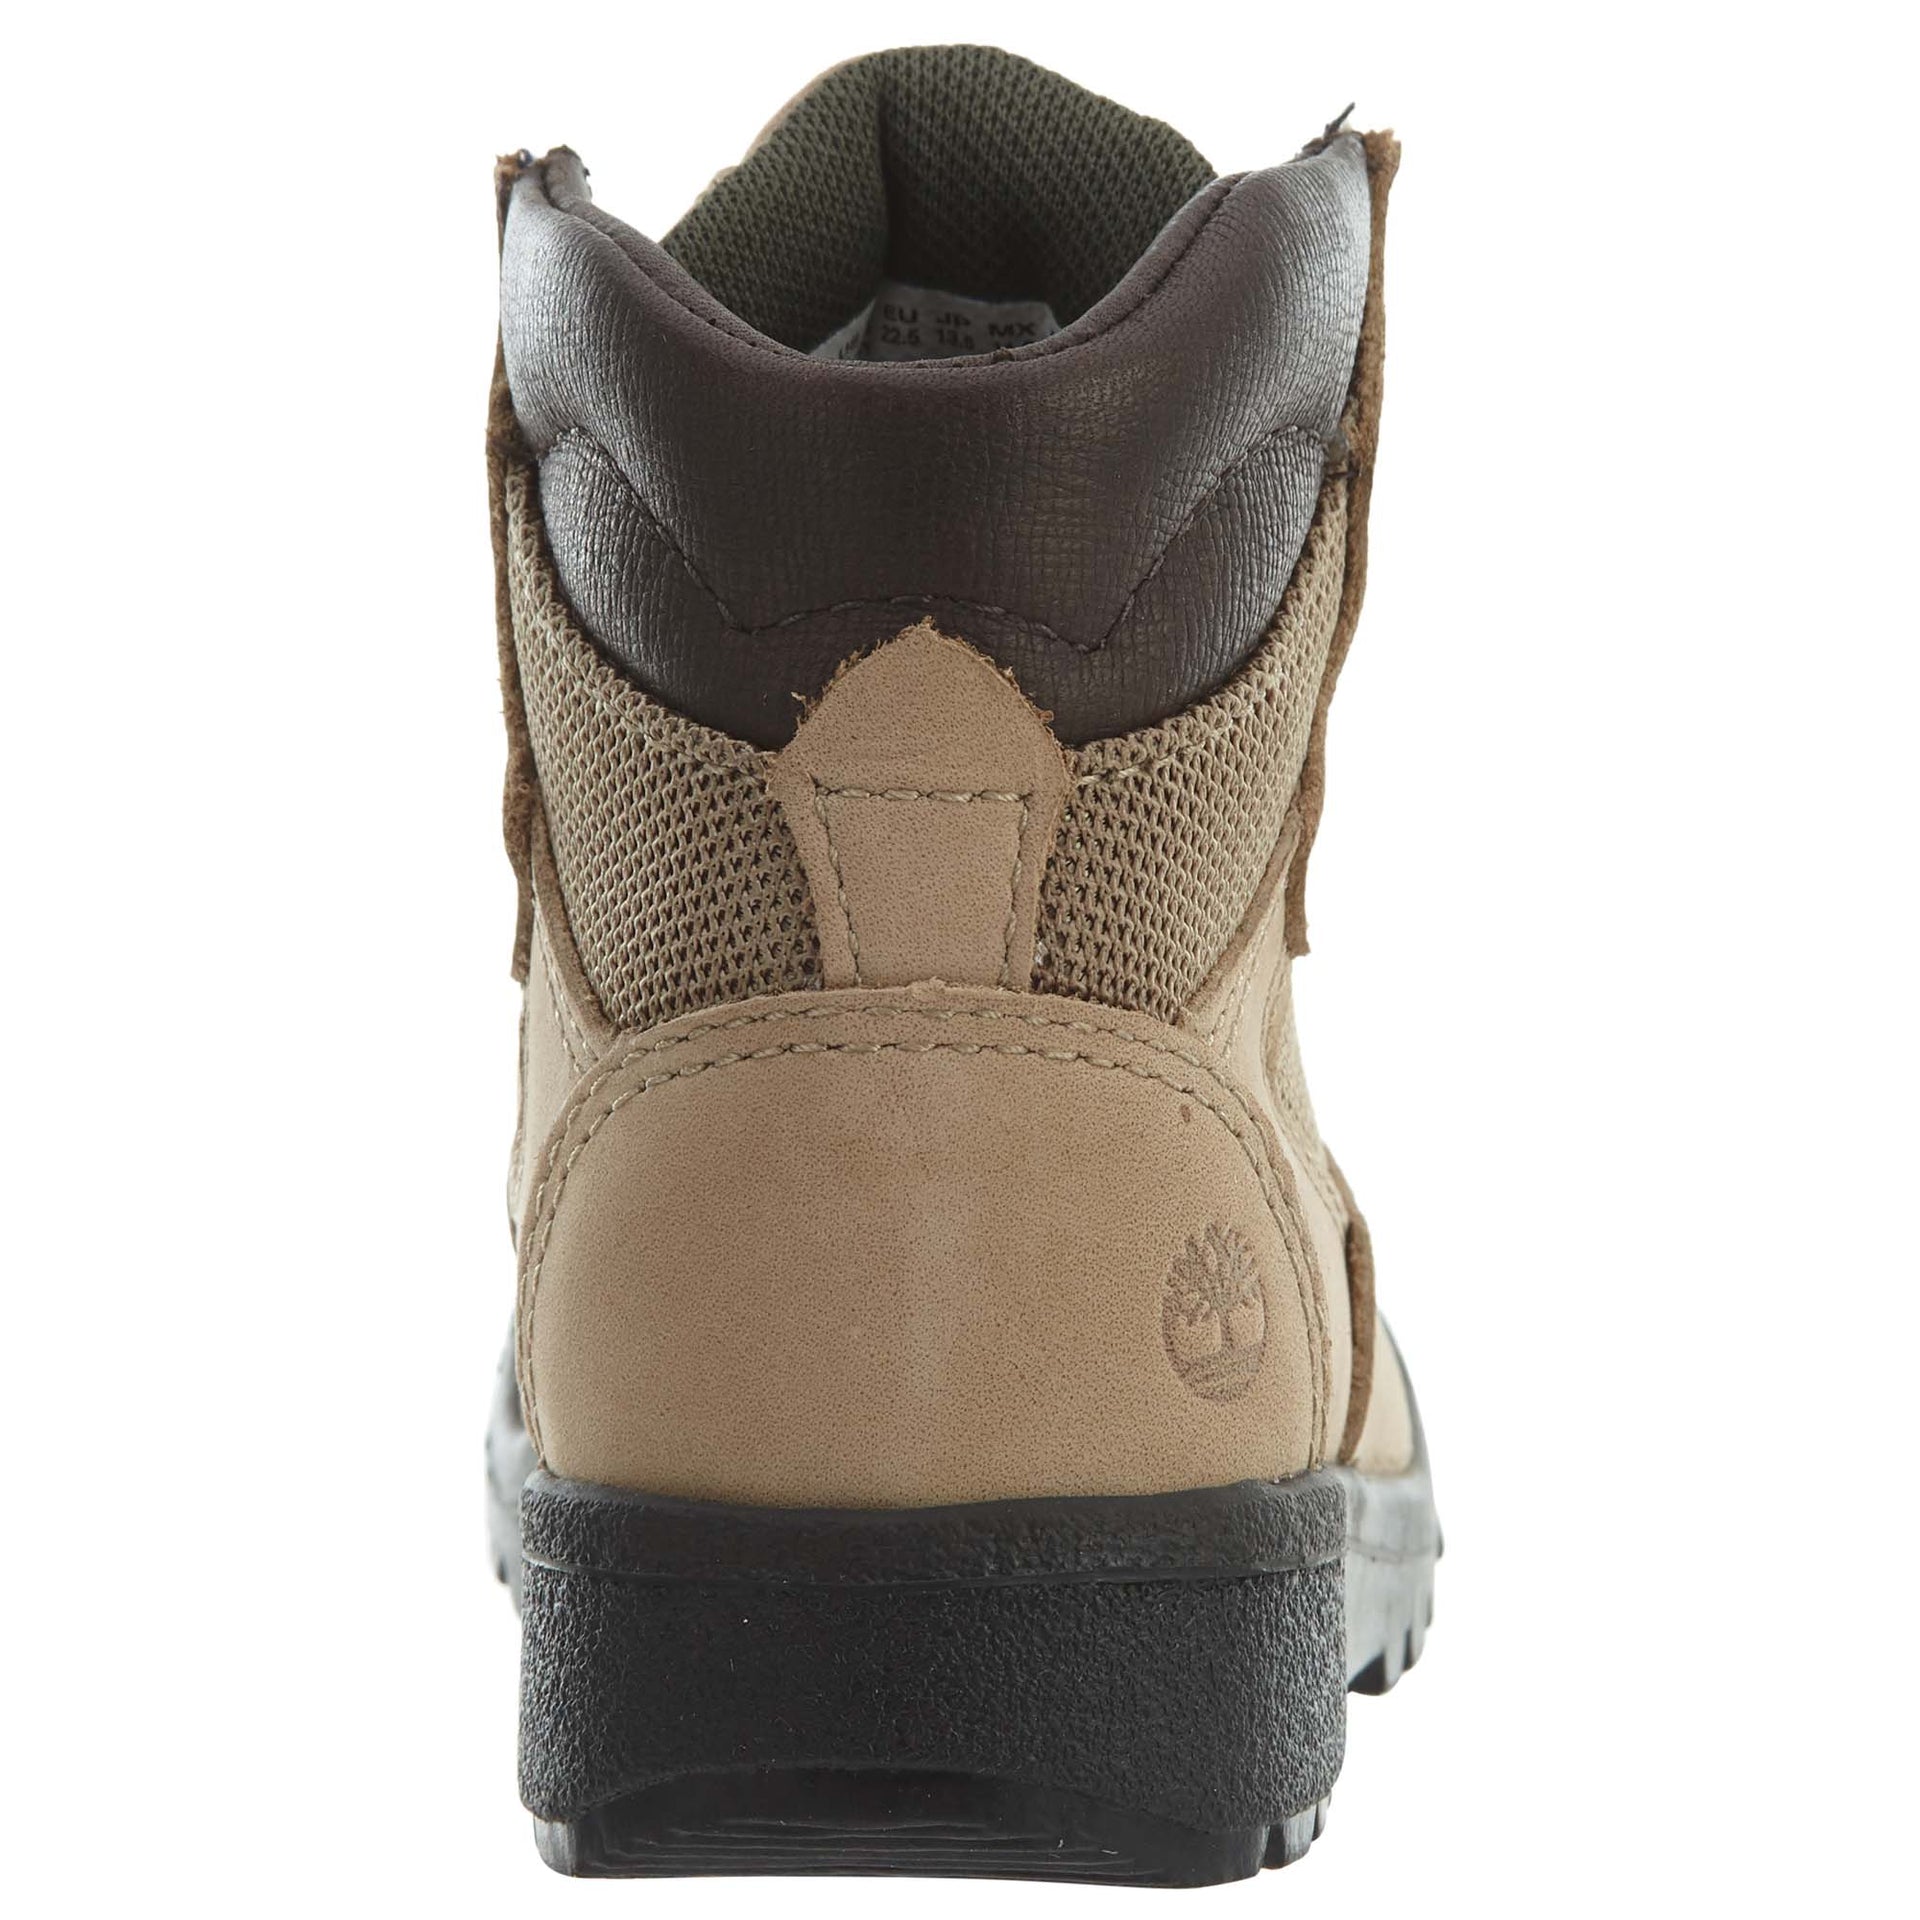 Timberland 6 Inch L/f Field Boot Toddlers Style : Tb0a1pzy